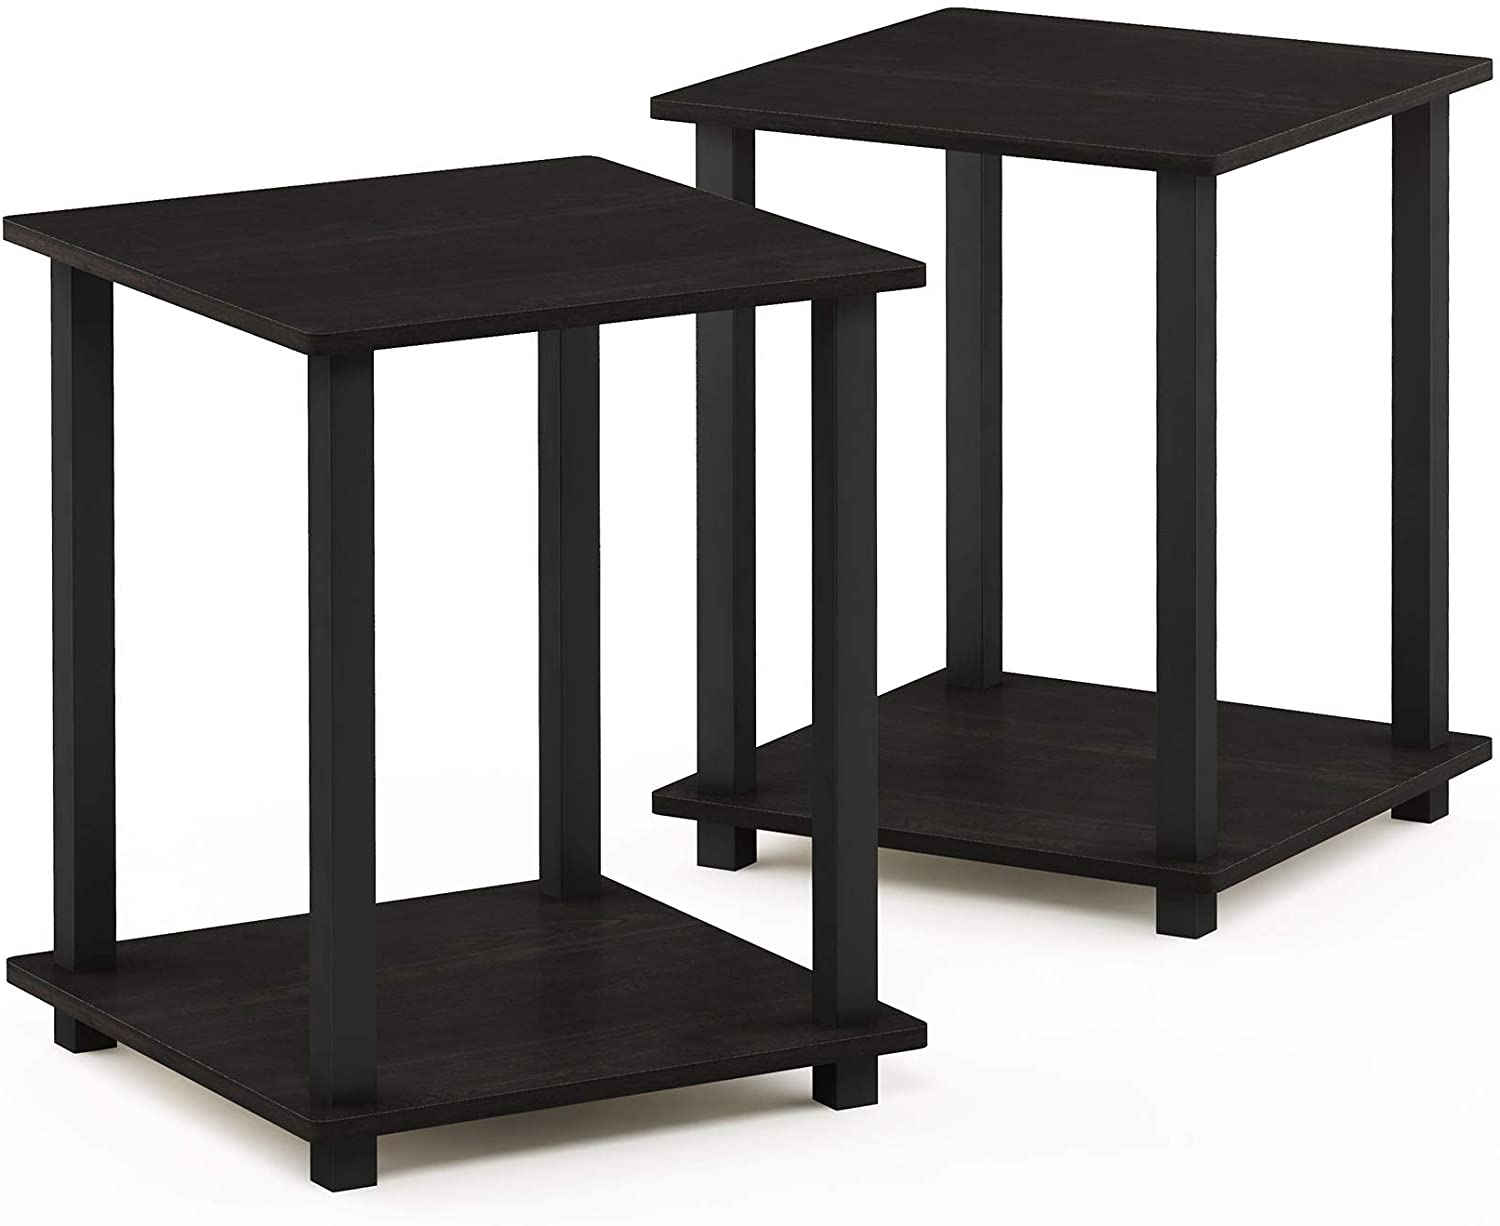 Furinno PVC Tubes Compact Night Stand, Set Of 2